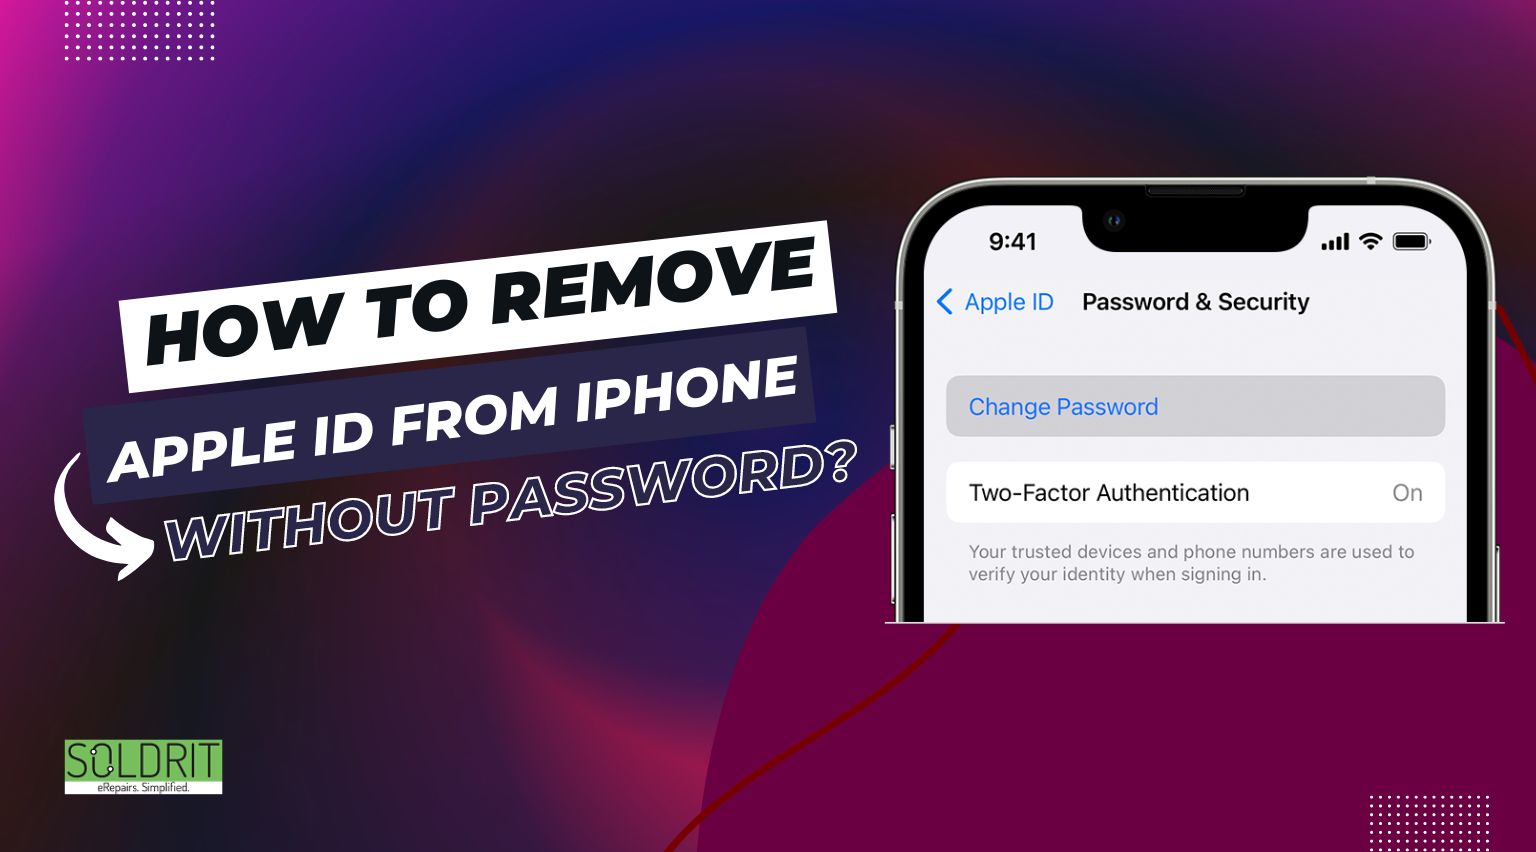 How to remove apple id from iPhone without password?